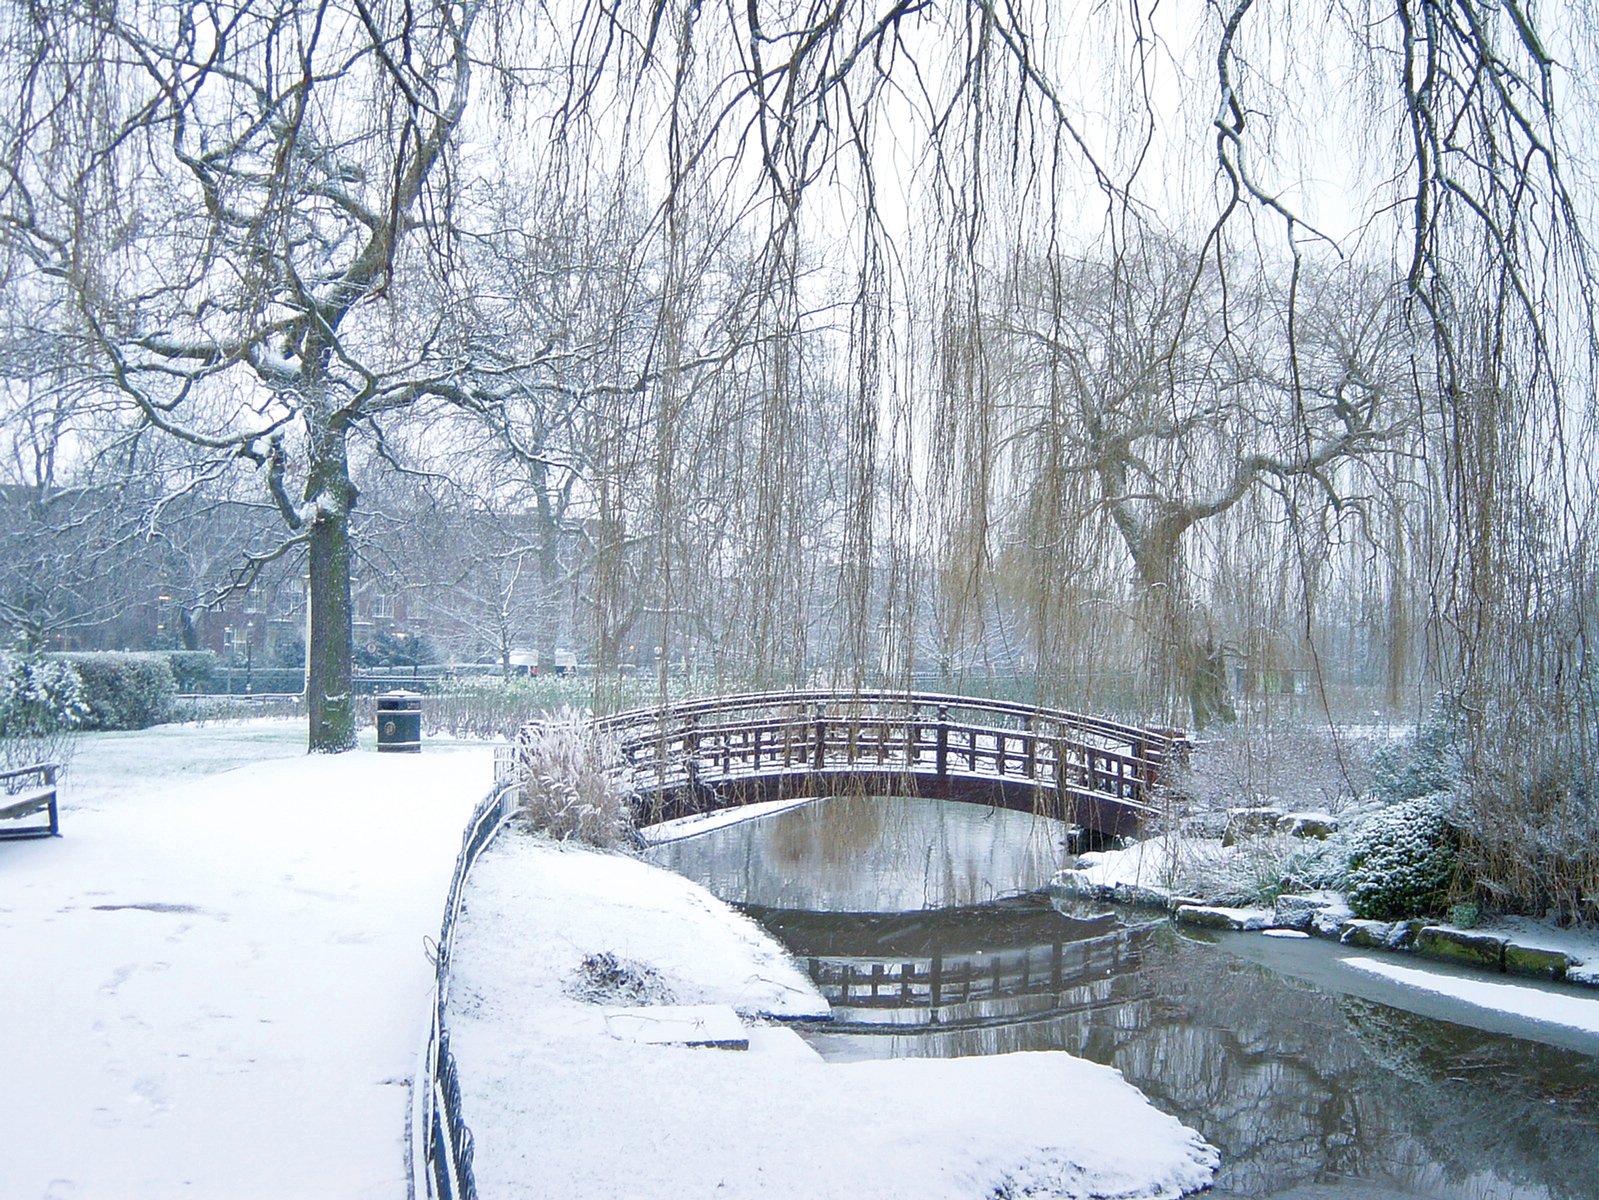 a snowy pond next to a bridge with benches underneath it